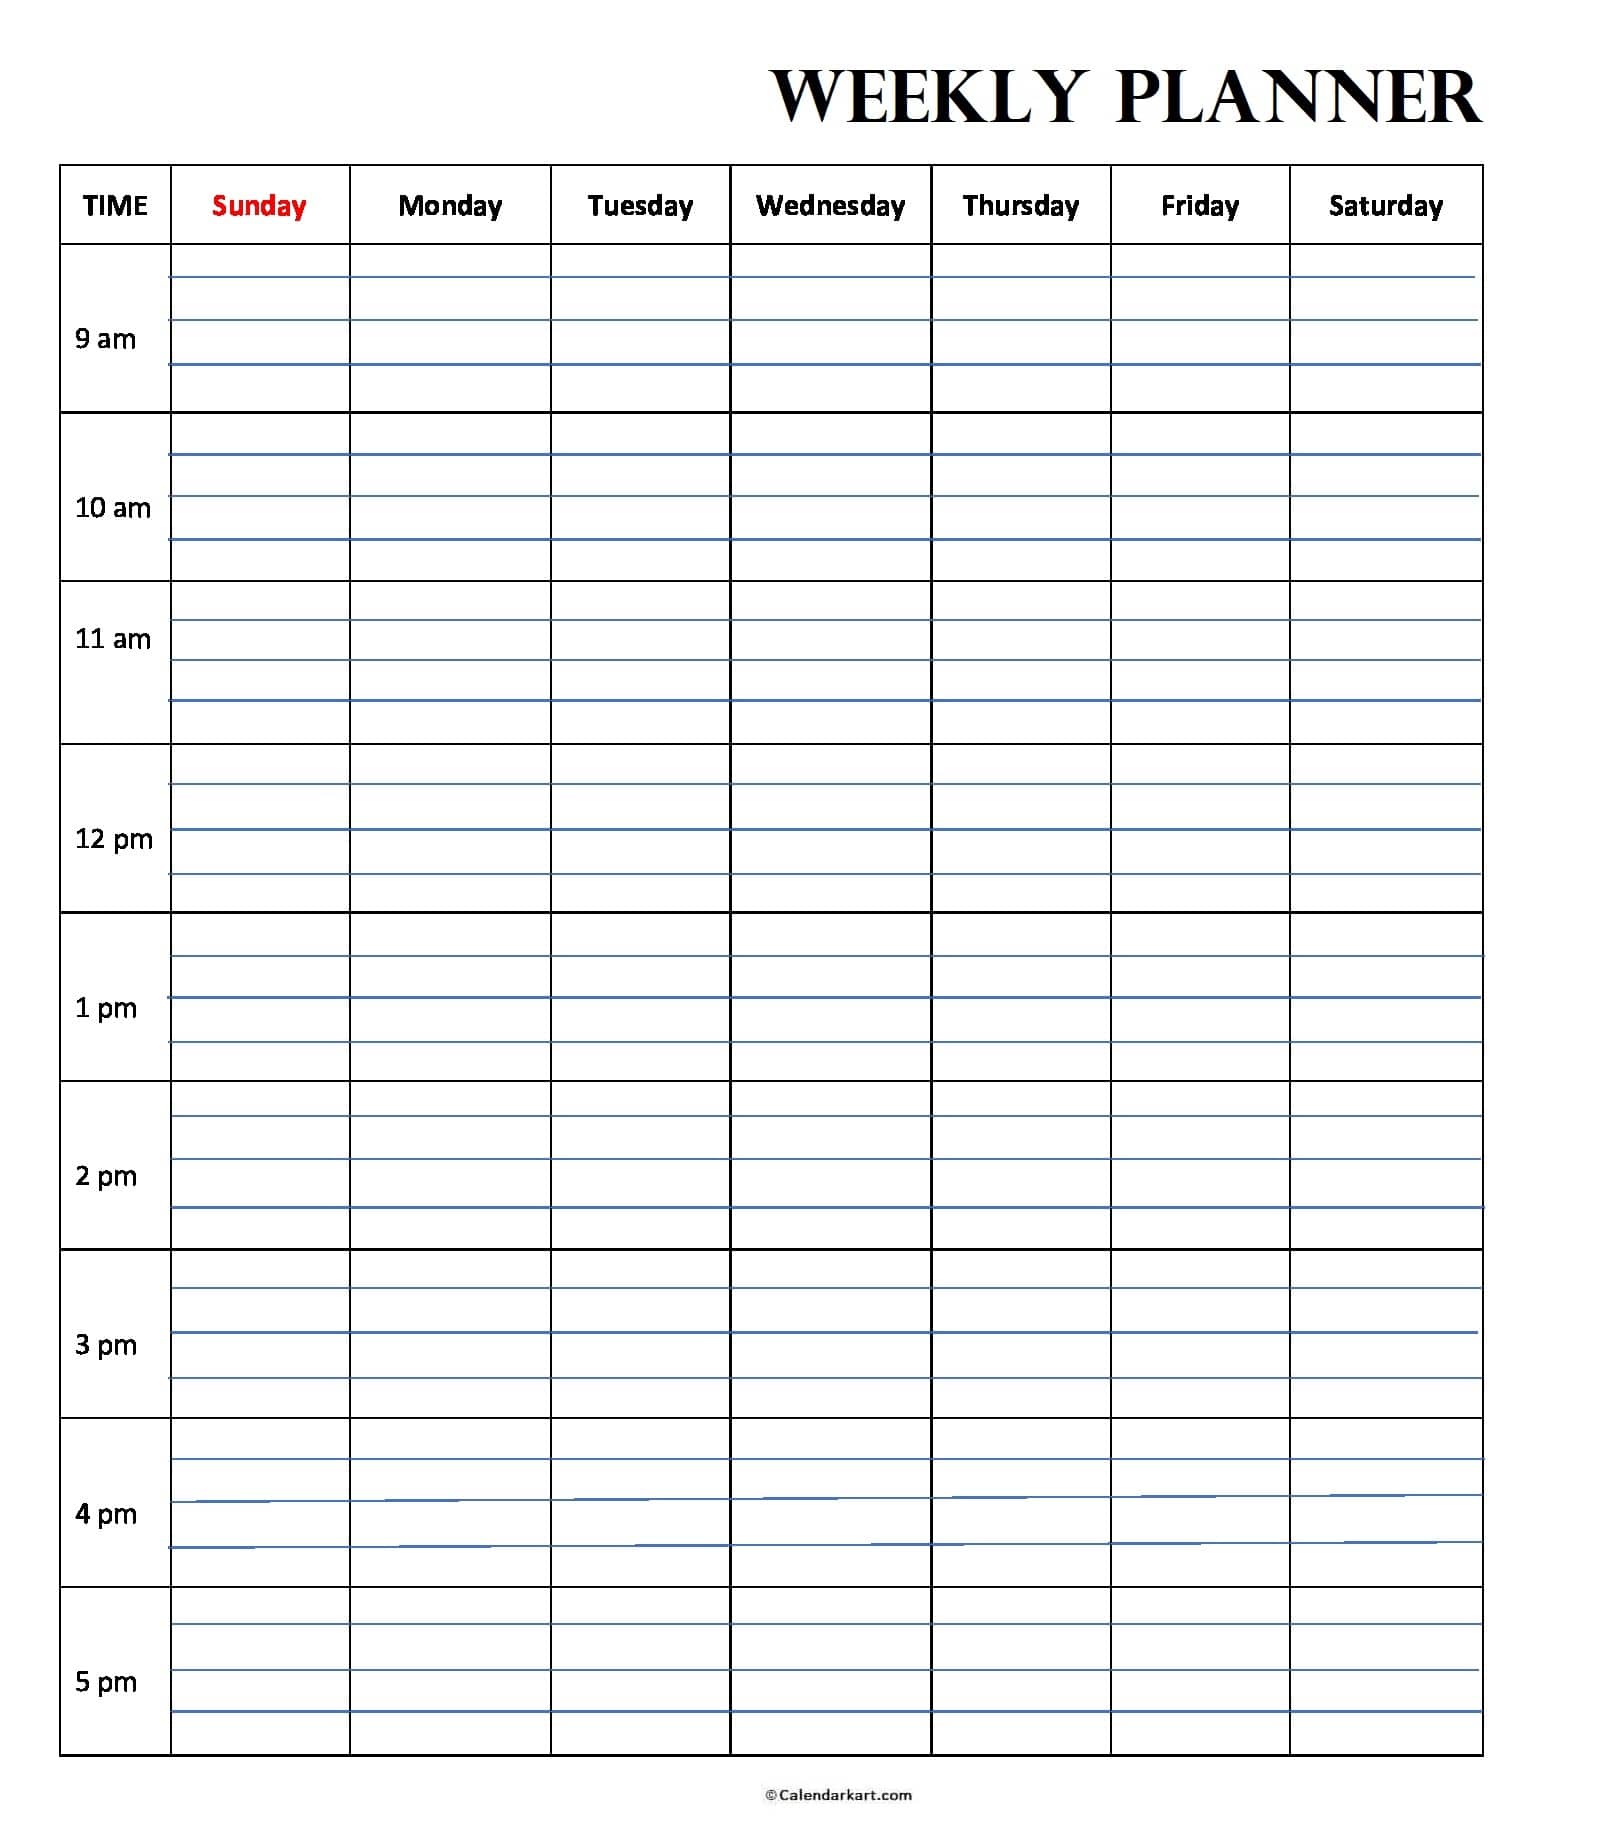 weekly time slots with schedule 36